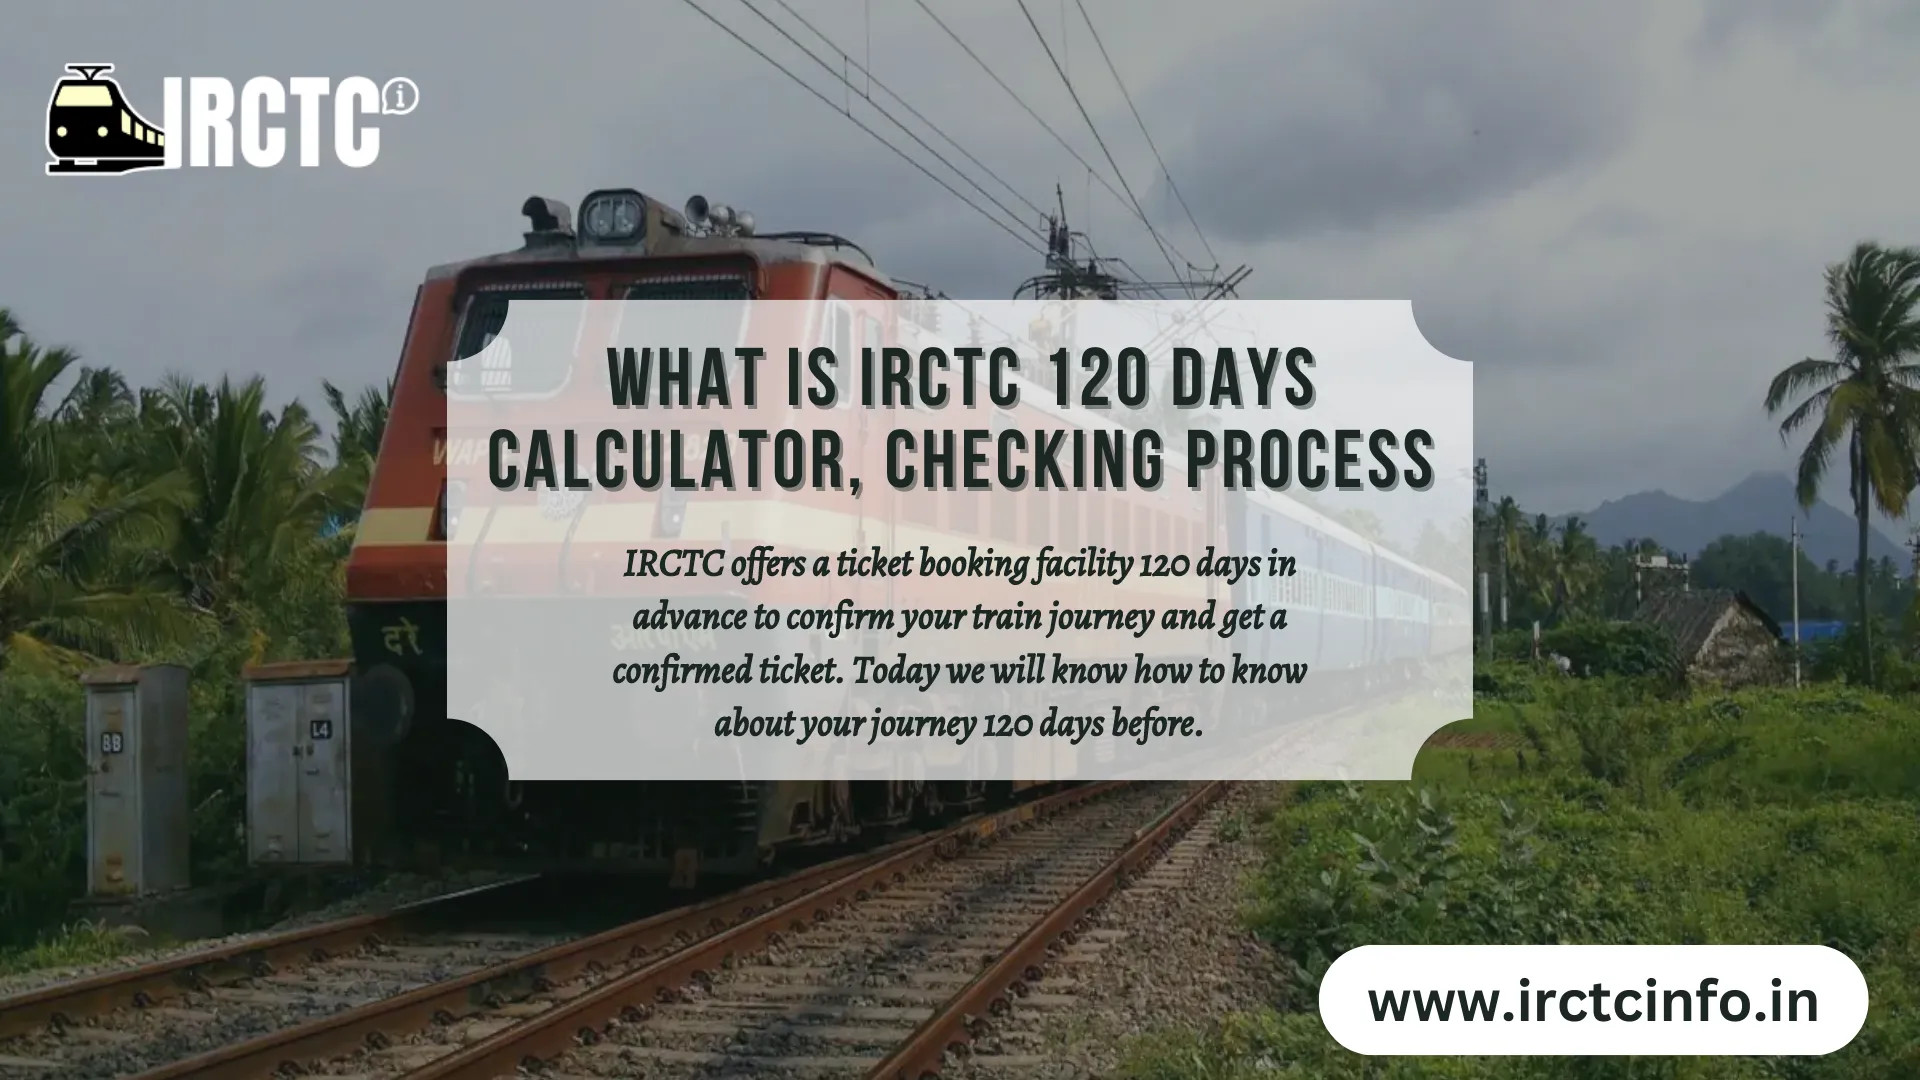 What is IRCTC 120 days calculator, Checking Process